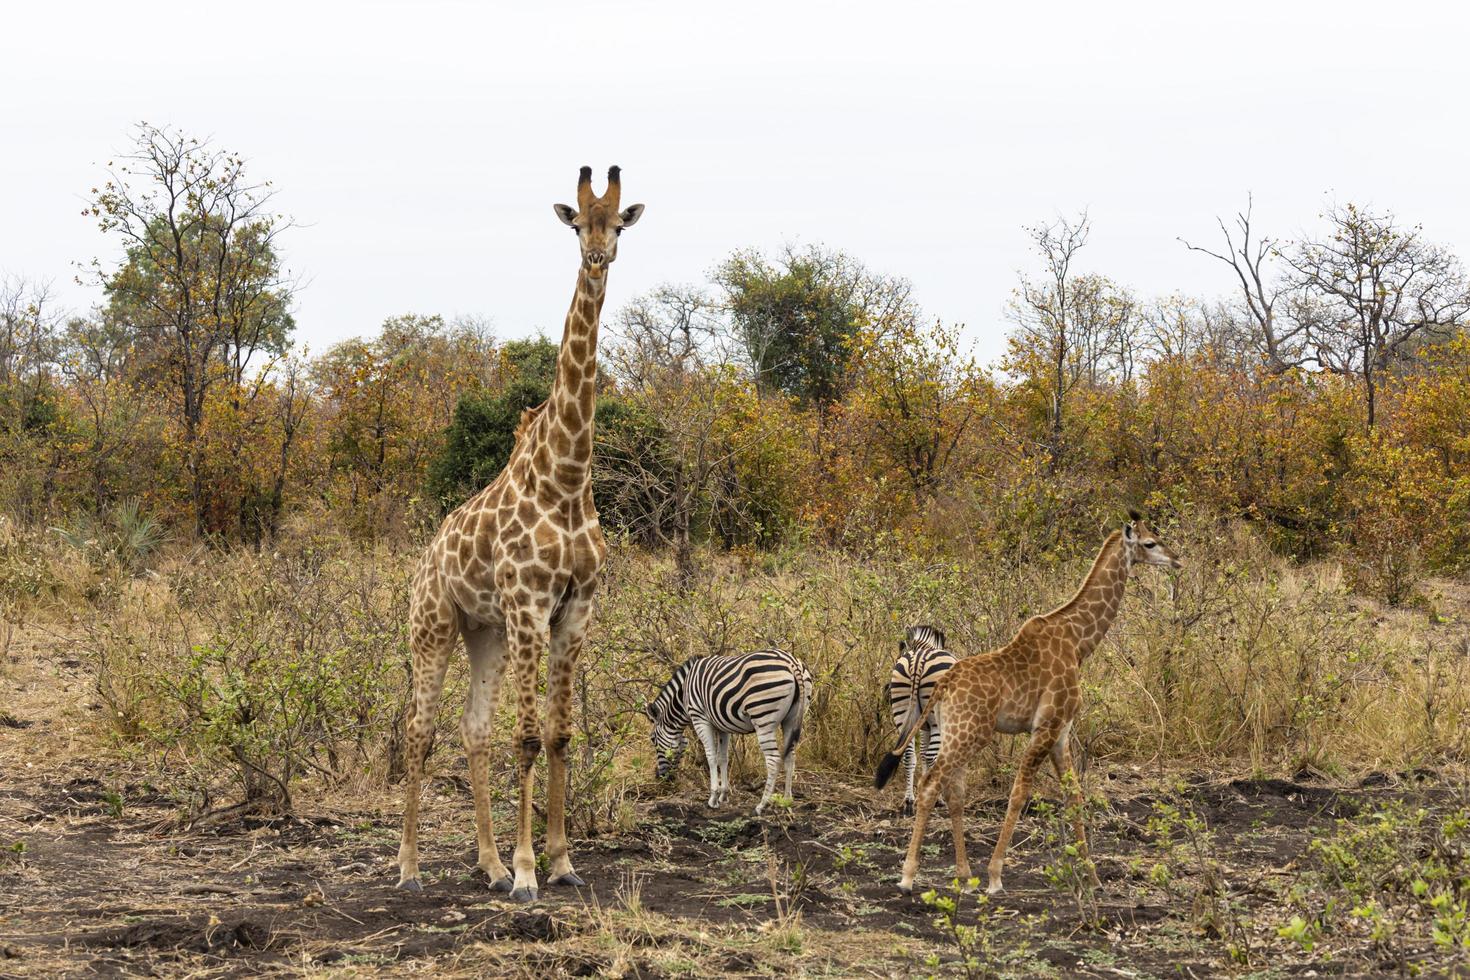 Adult and juvenile giraffe and zebras photo